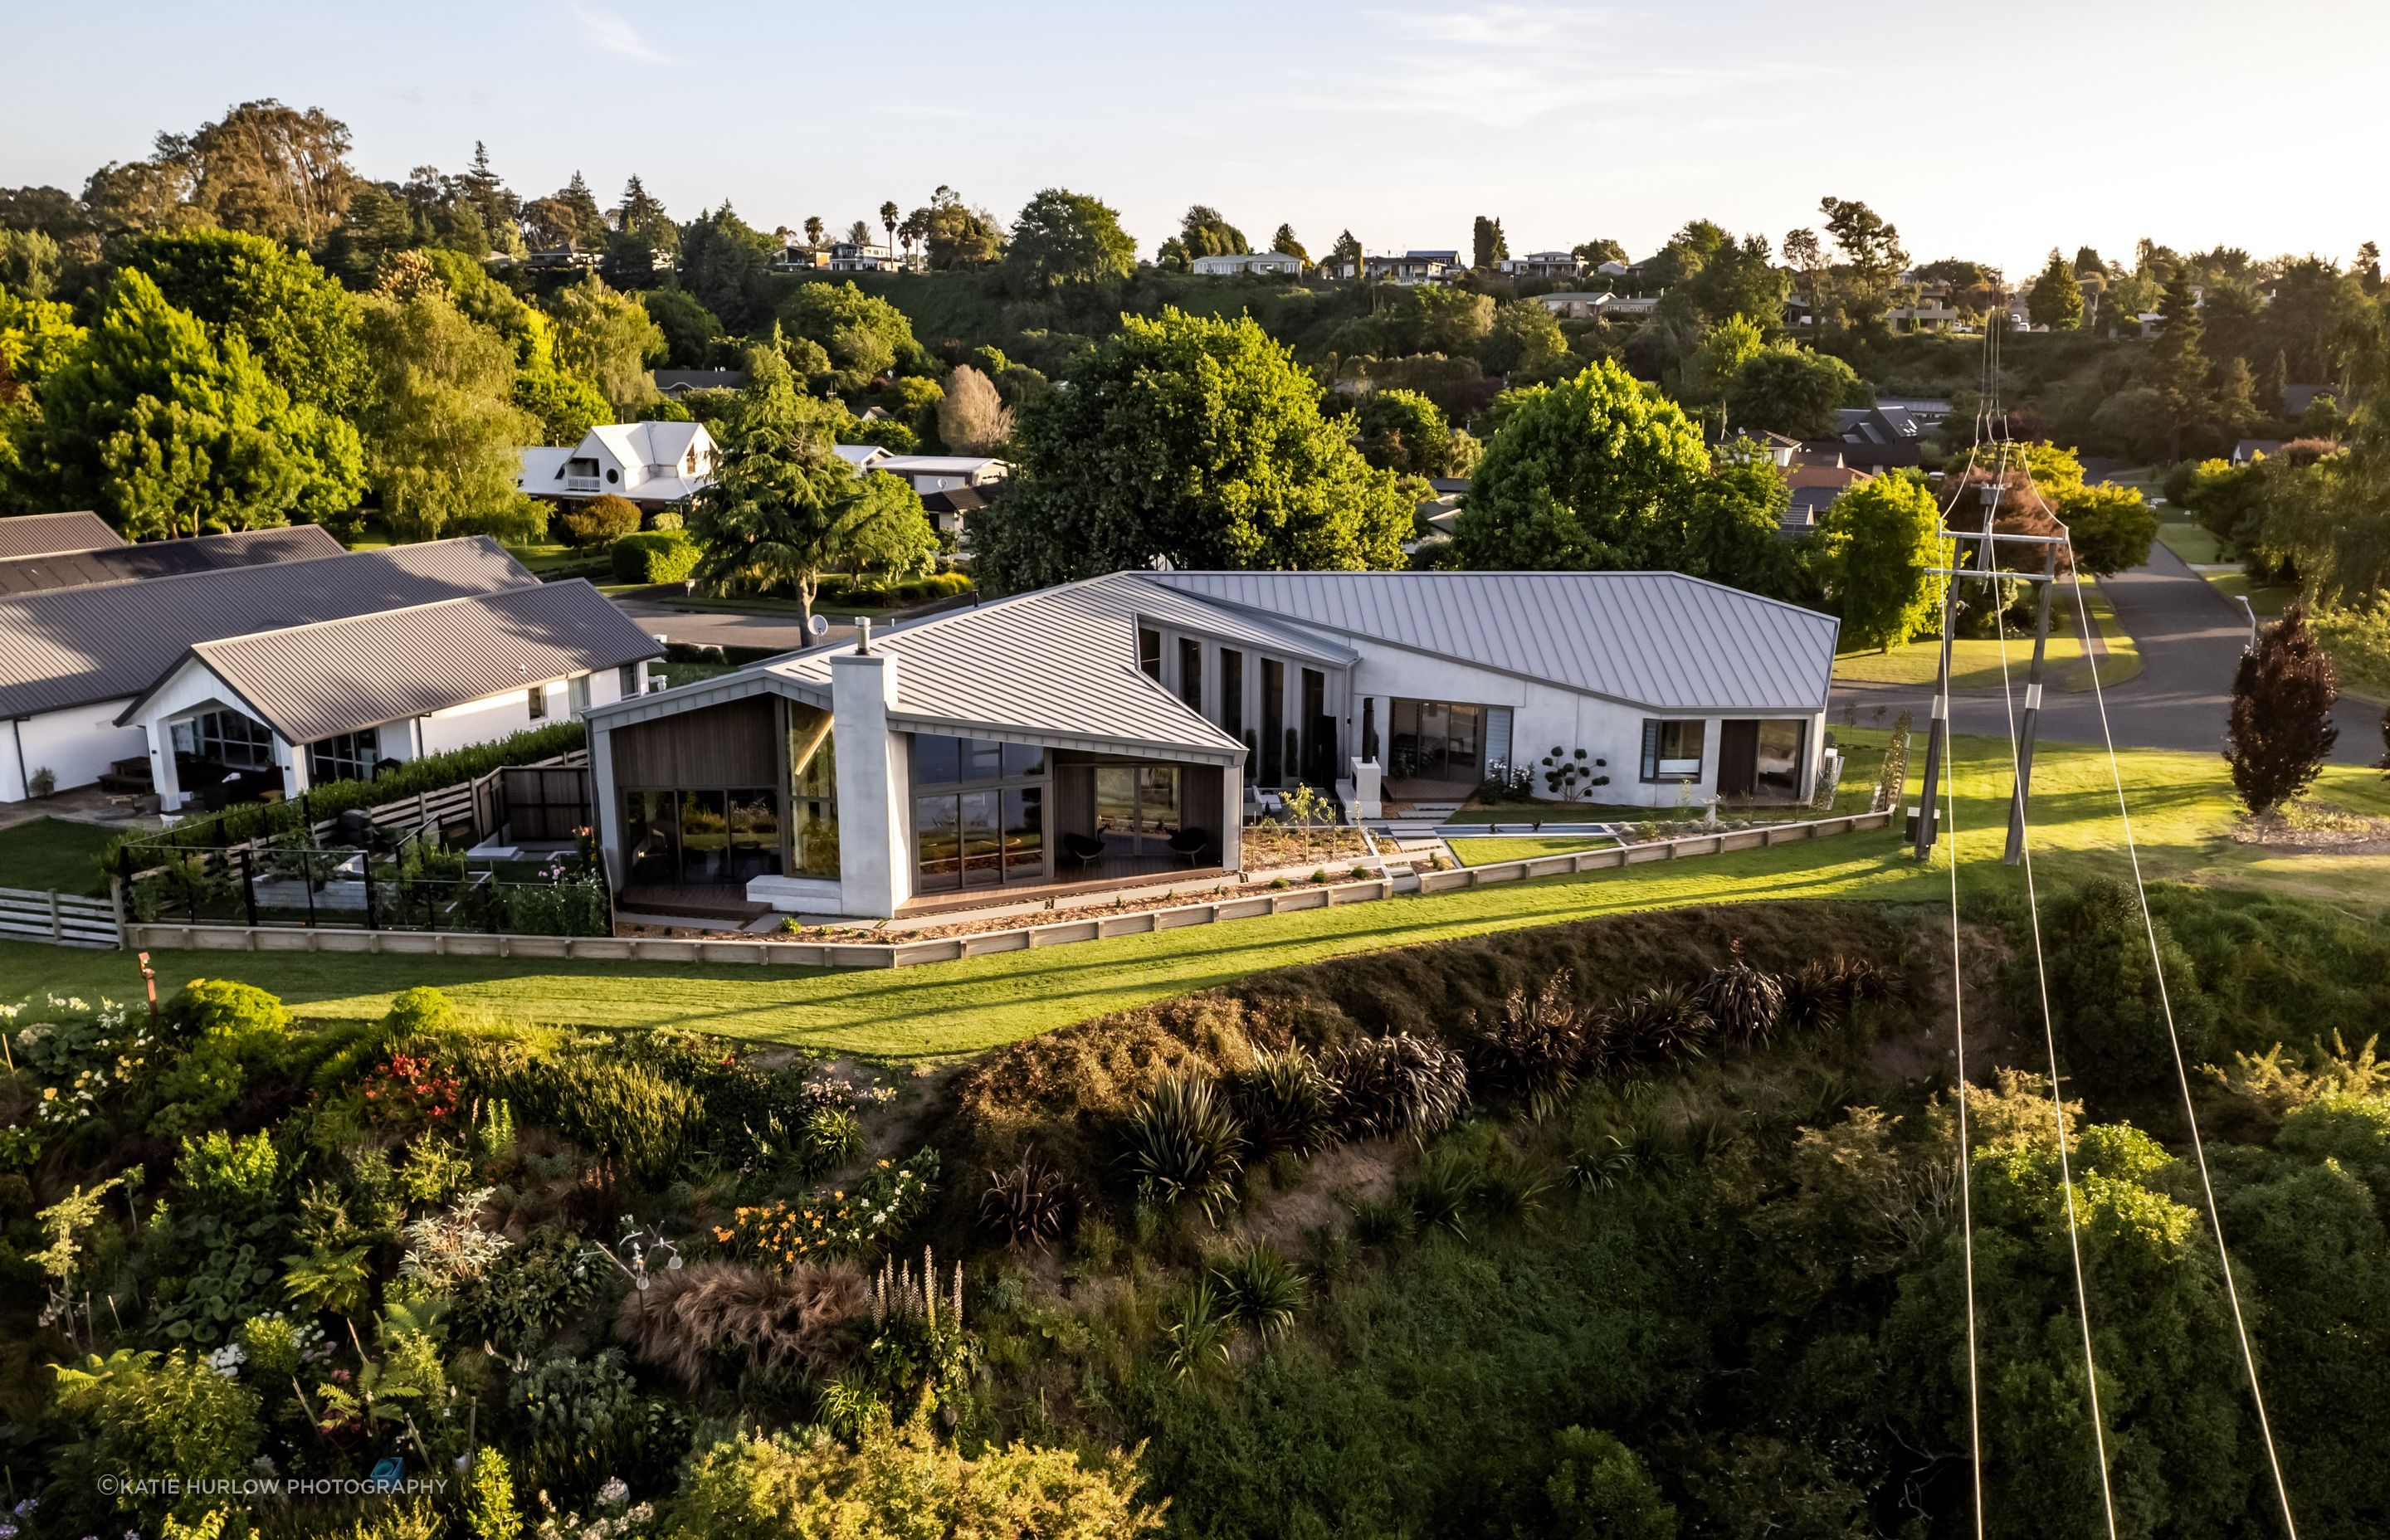 Seen from above, the sculptural form of the home hugs the landscape, drawing in the light and the views, while creating privacy from the street and neighbours.